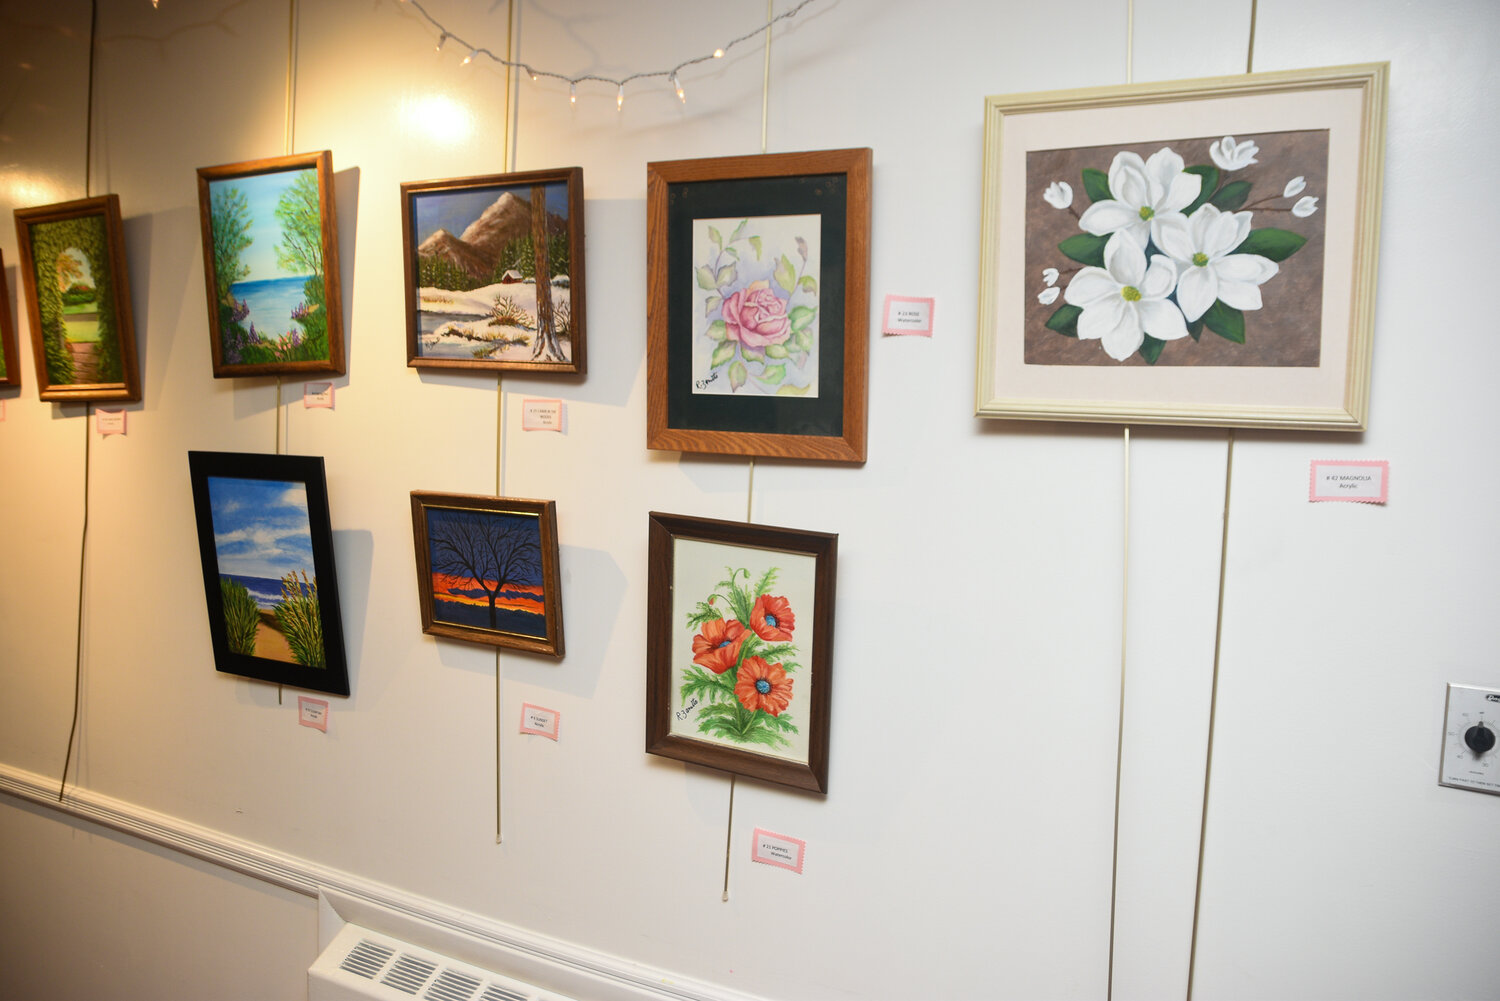 Rosemarie Zanetto, a local artist, will display her work for the month of November at the Bellmore Memorial Library. Above, some of her pieces at the library.